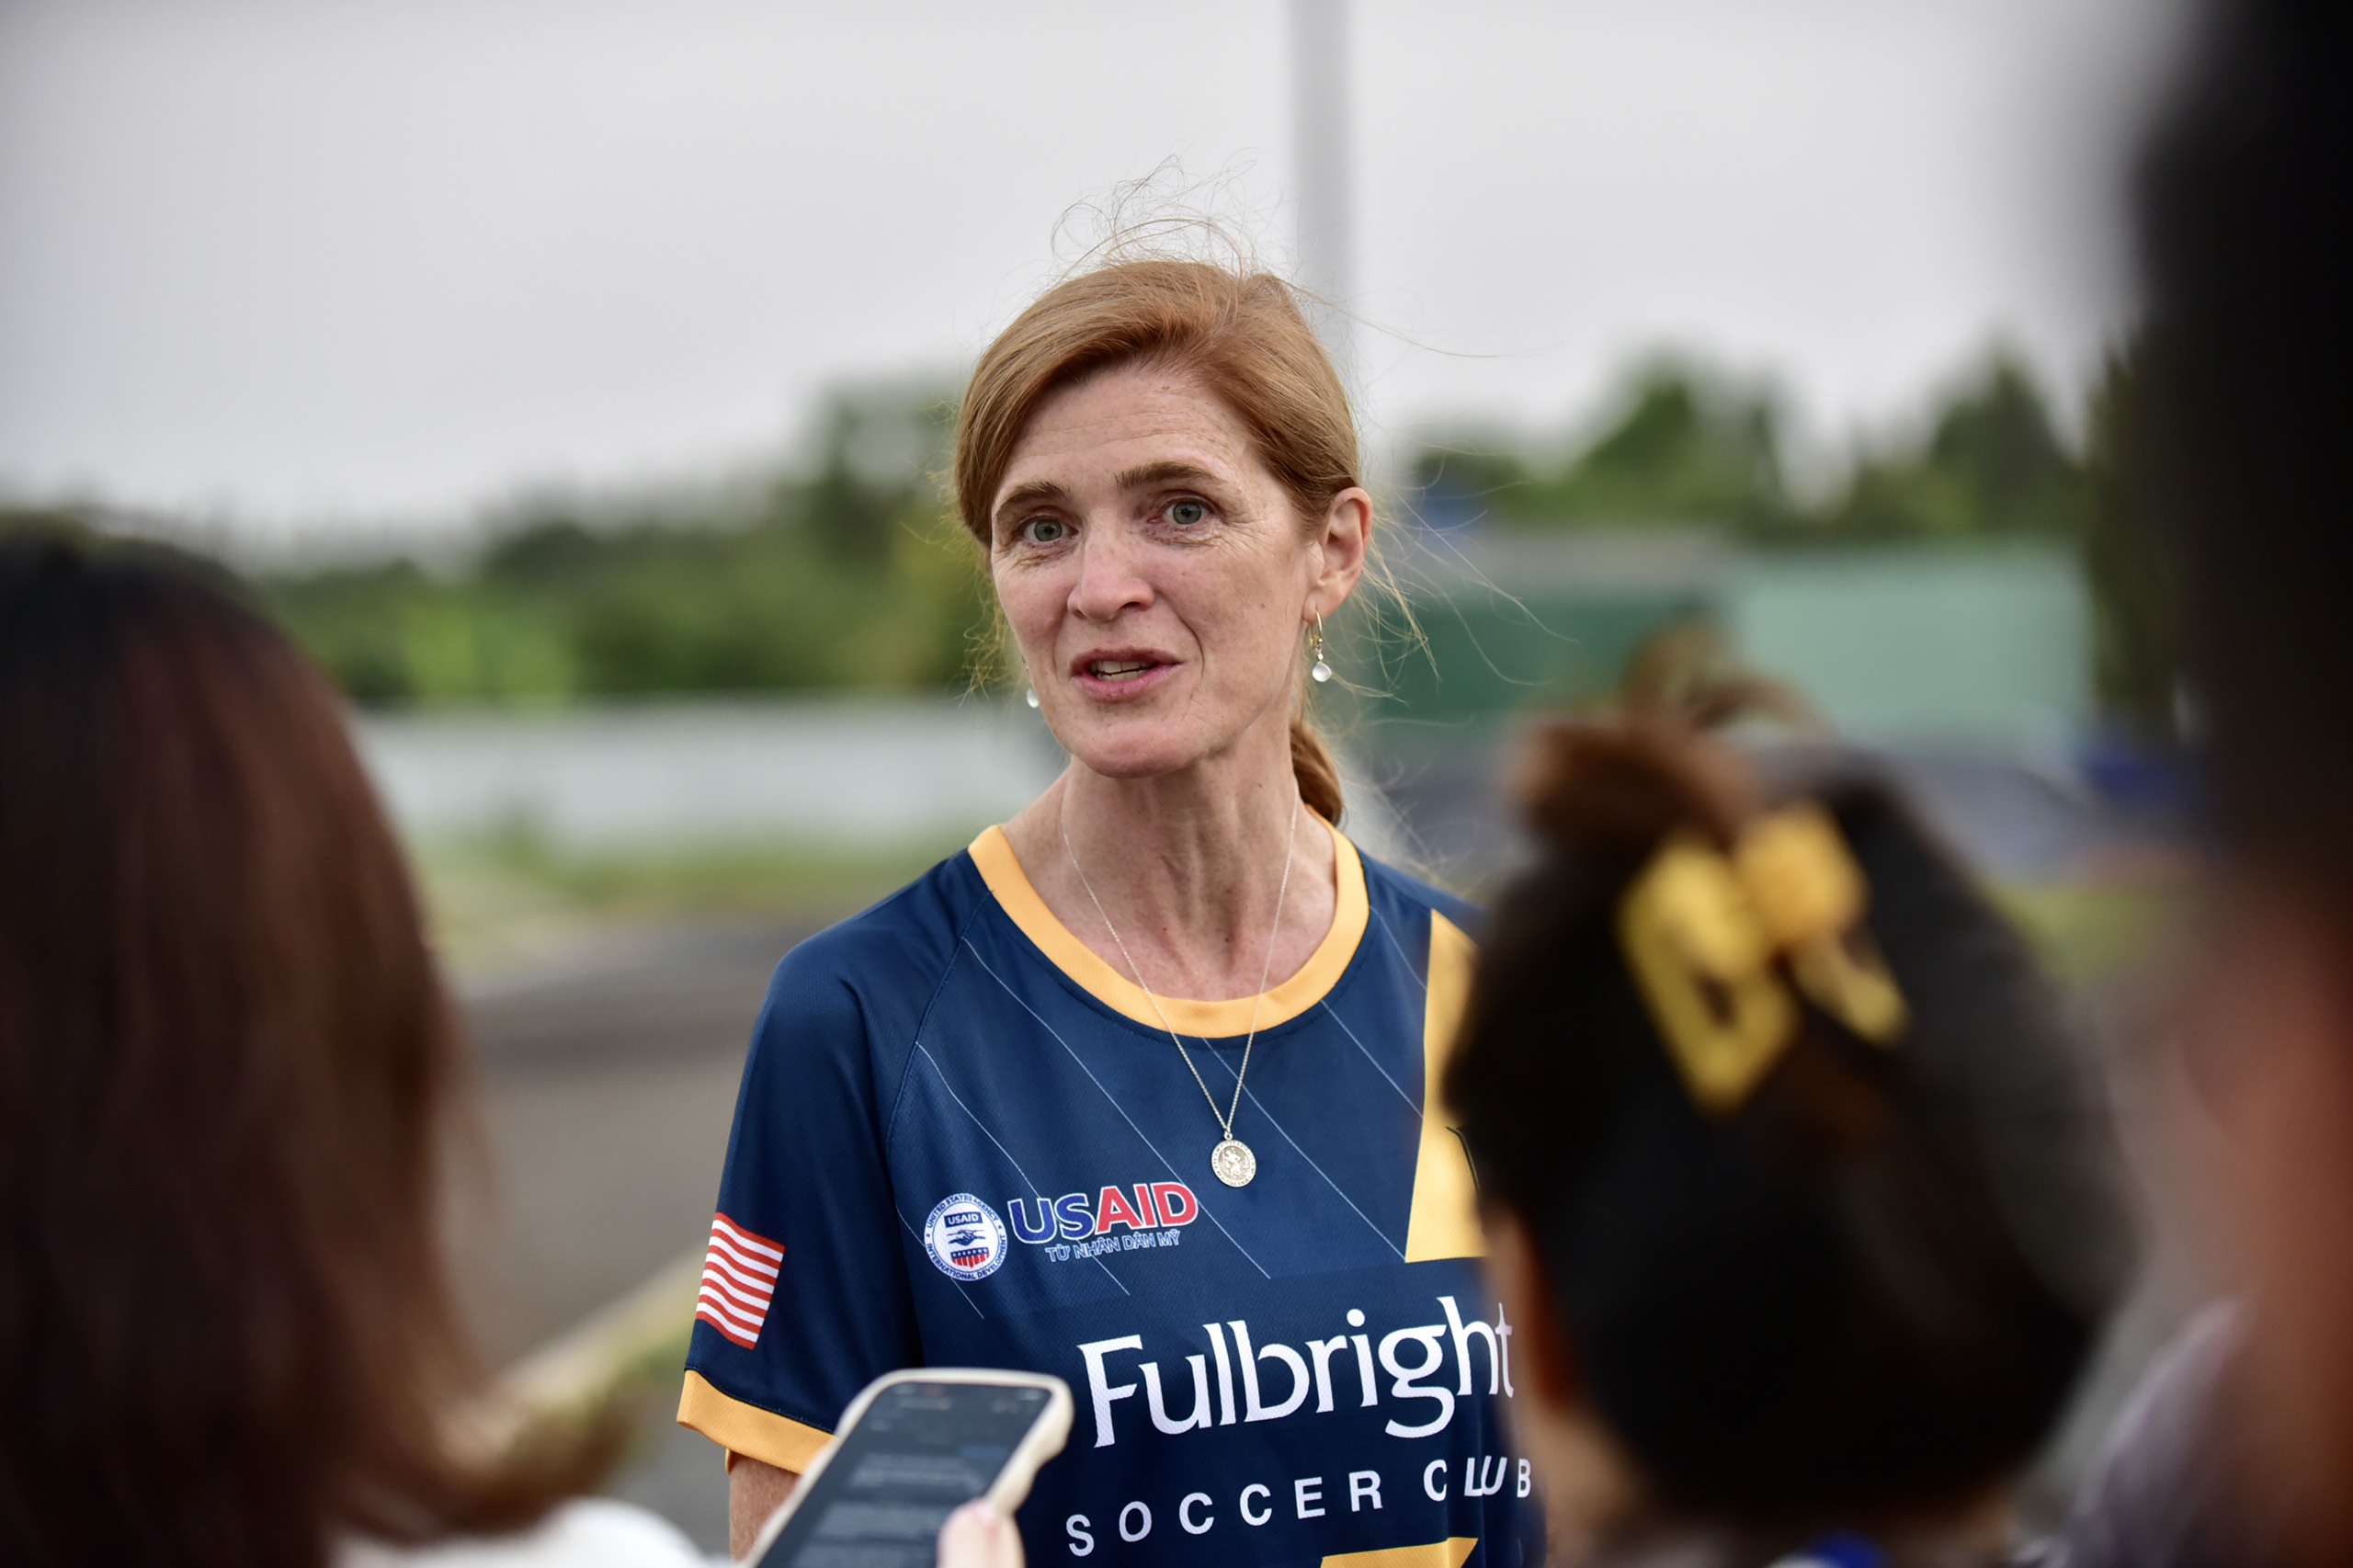 USAID Administrator Samantha Power speaks with the press after a scrimmage with Fulbright University Vietnam students. Photo: Tran Tien Dung / Tuoi Tre